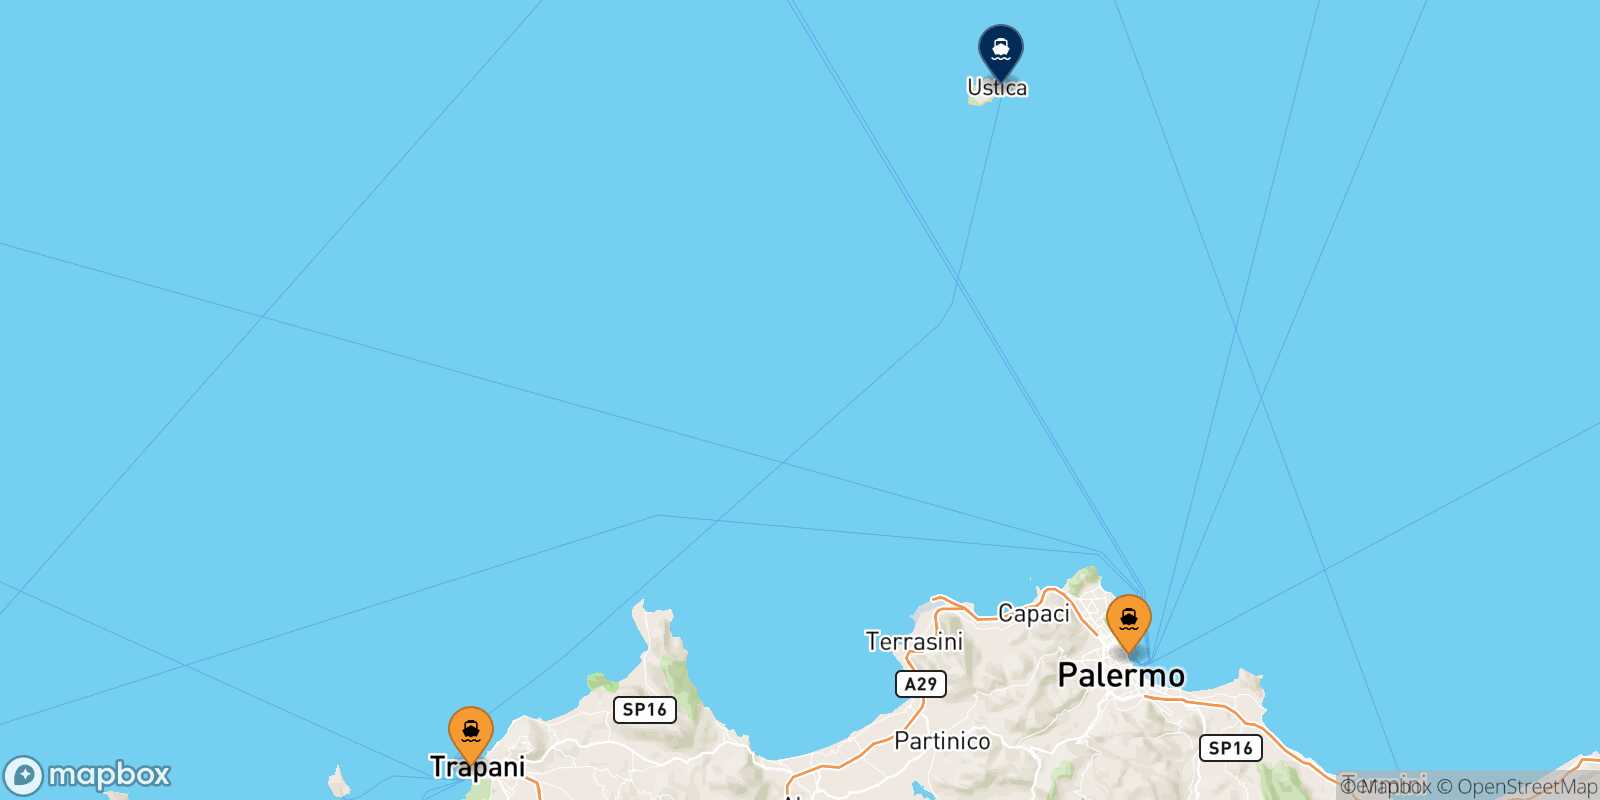 Map of the ports connected with  Ustica